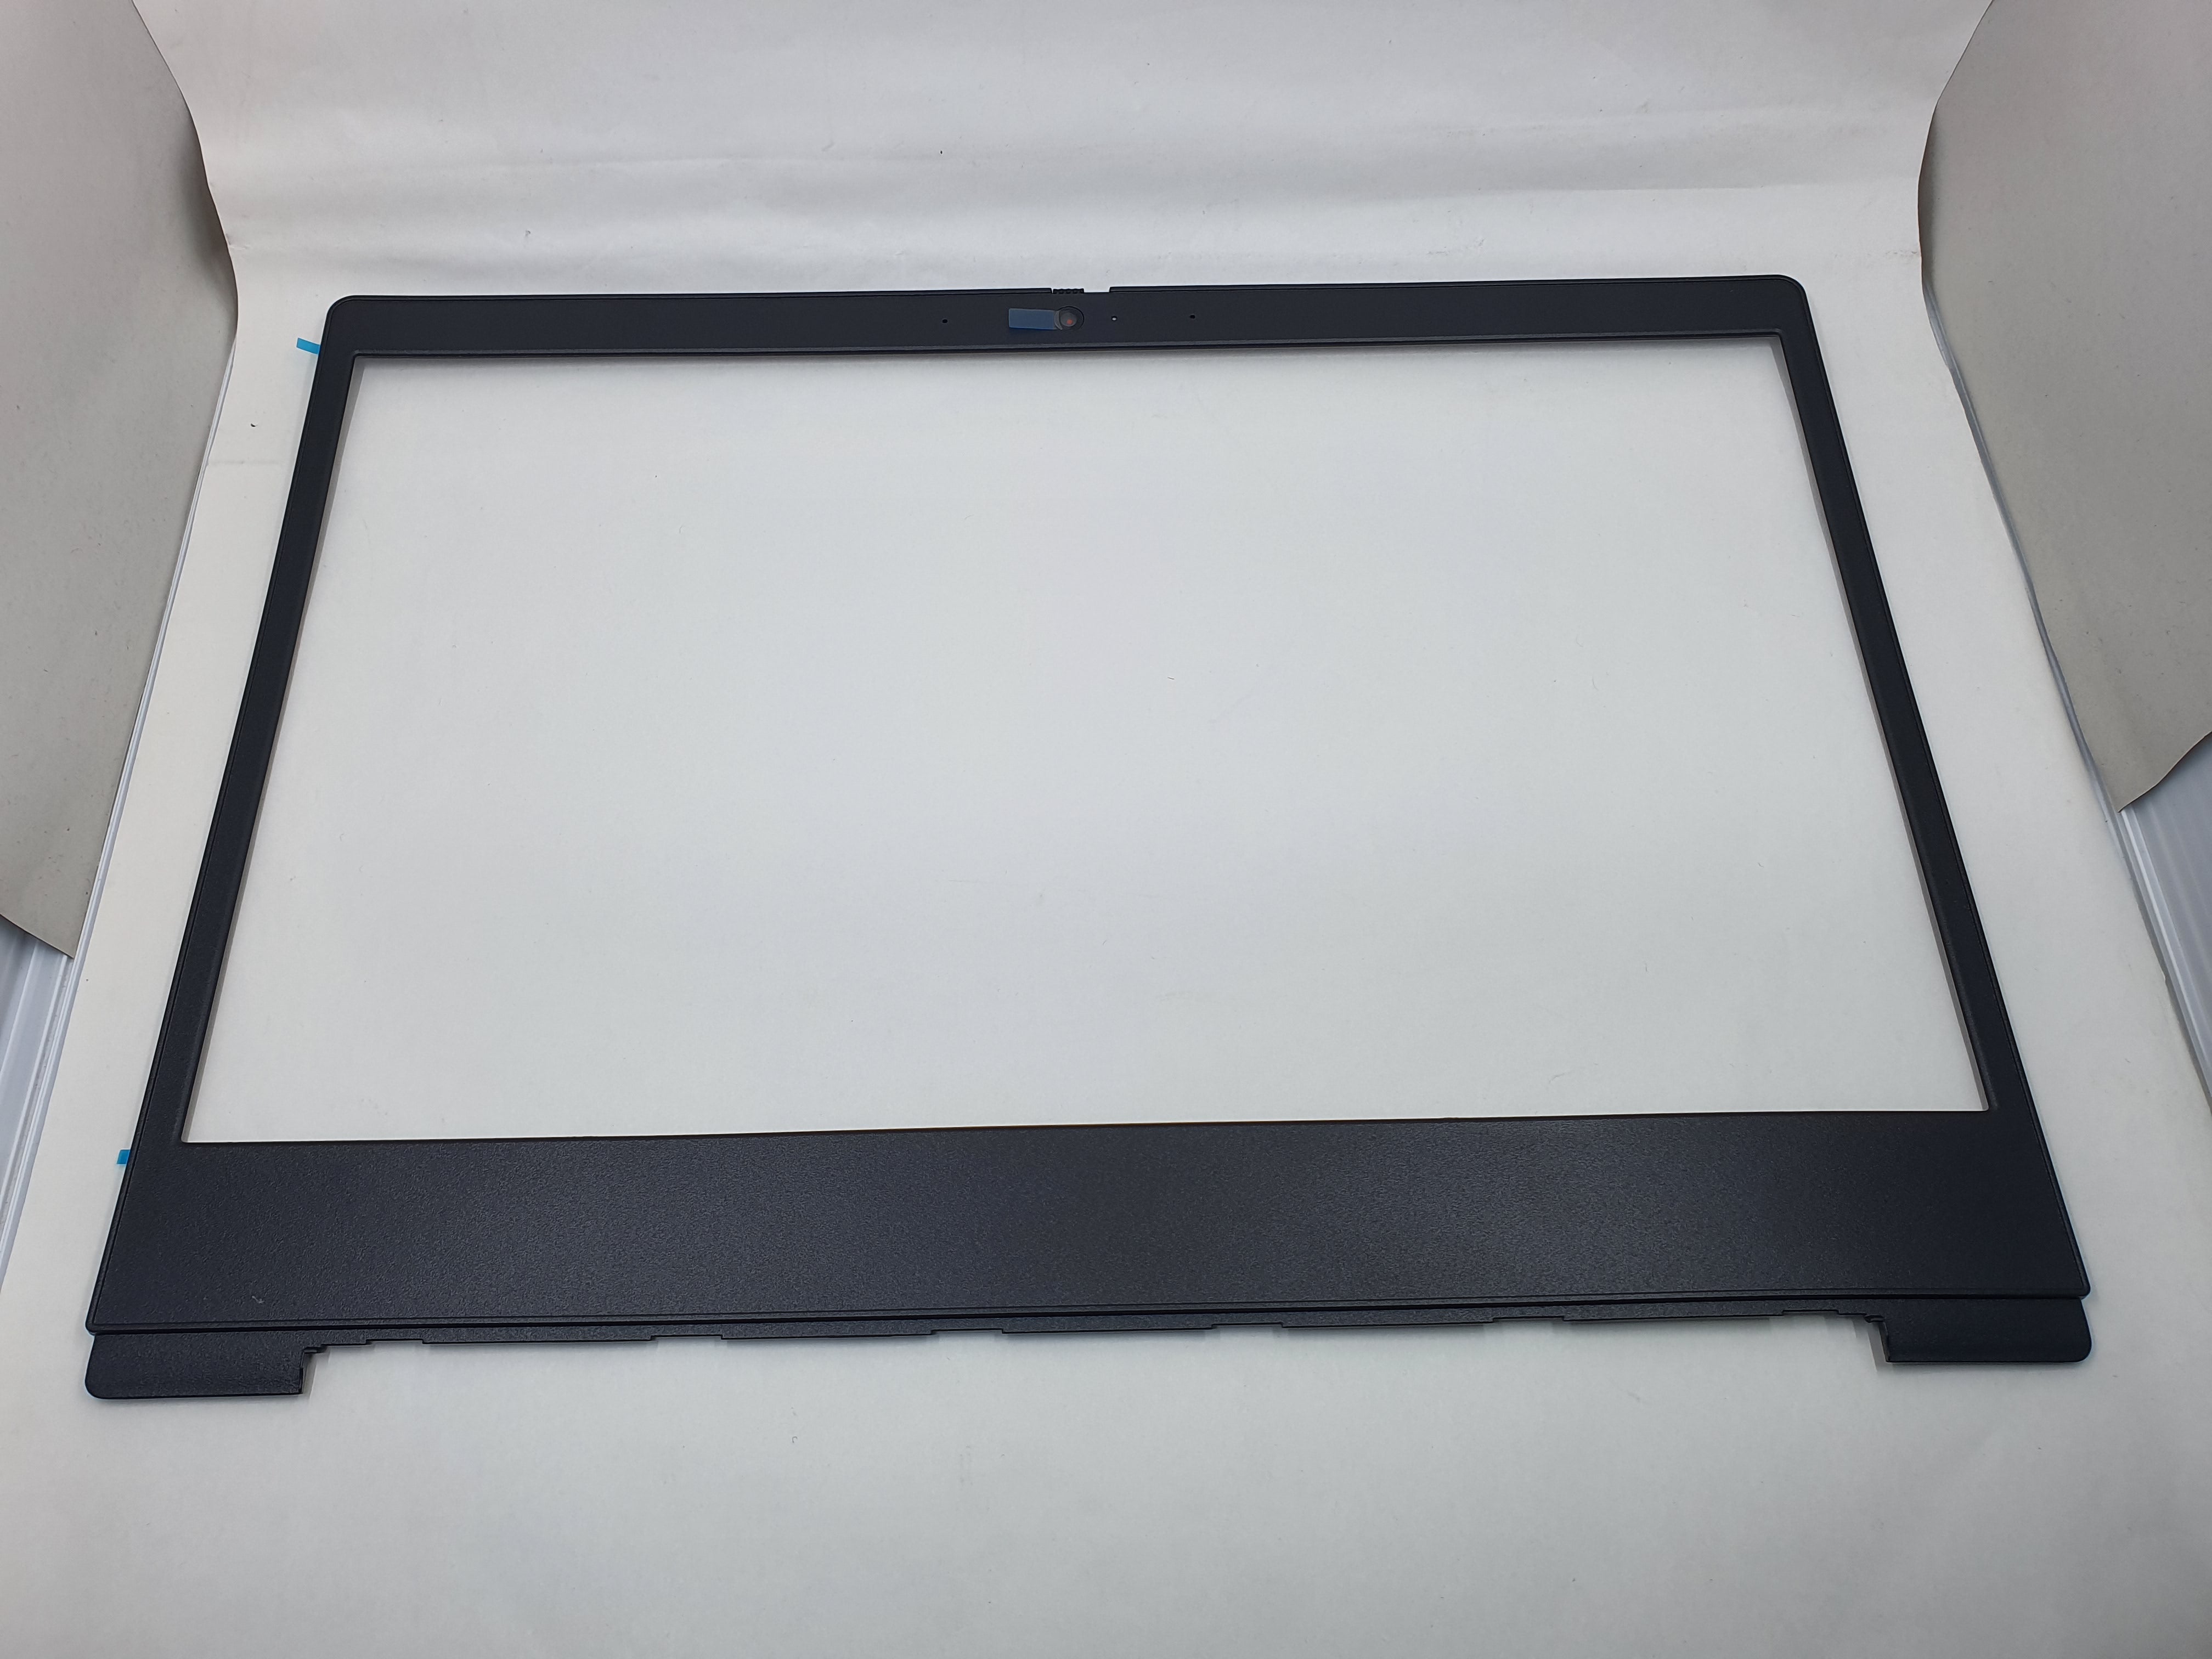 Lenovo LCD BEZEL IdeaPad 3-14IIL05 WLCL for Replacement - IdeaPad 3-14IIL05